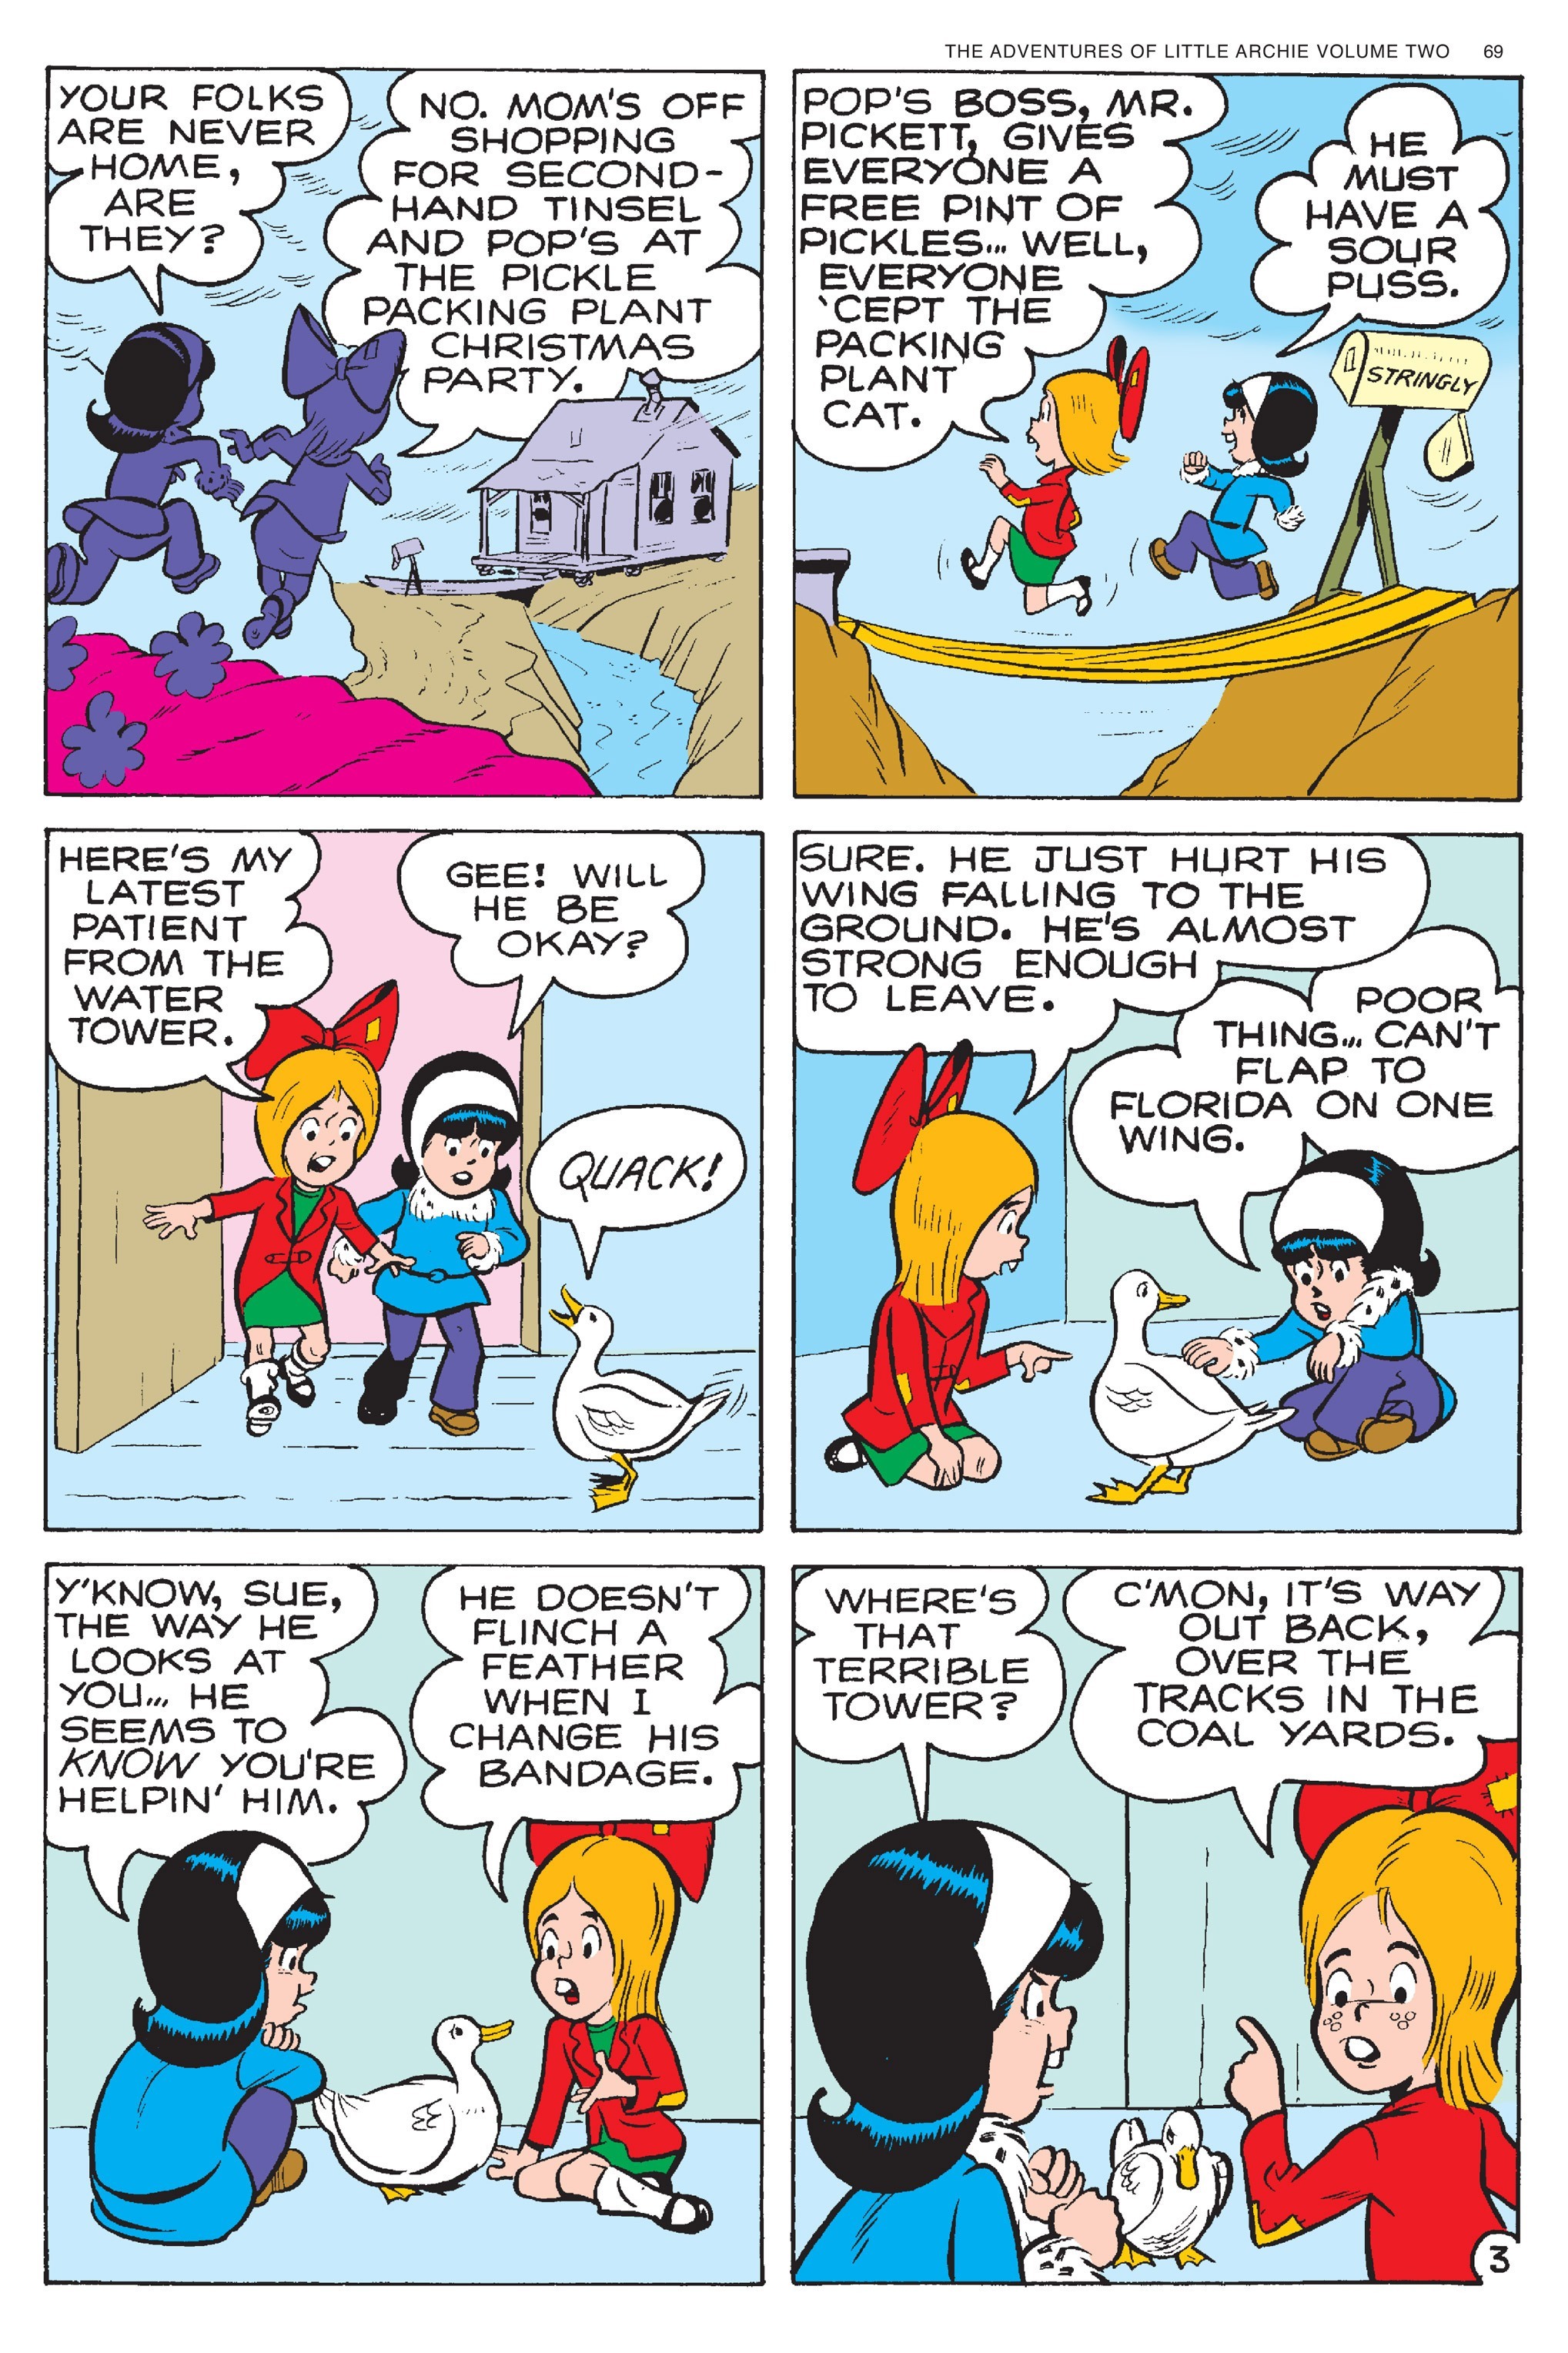 Read online Adventures of Little Archie comic -  Issue # TPB 2 - 70